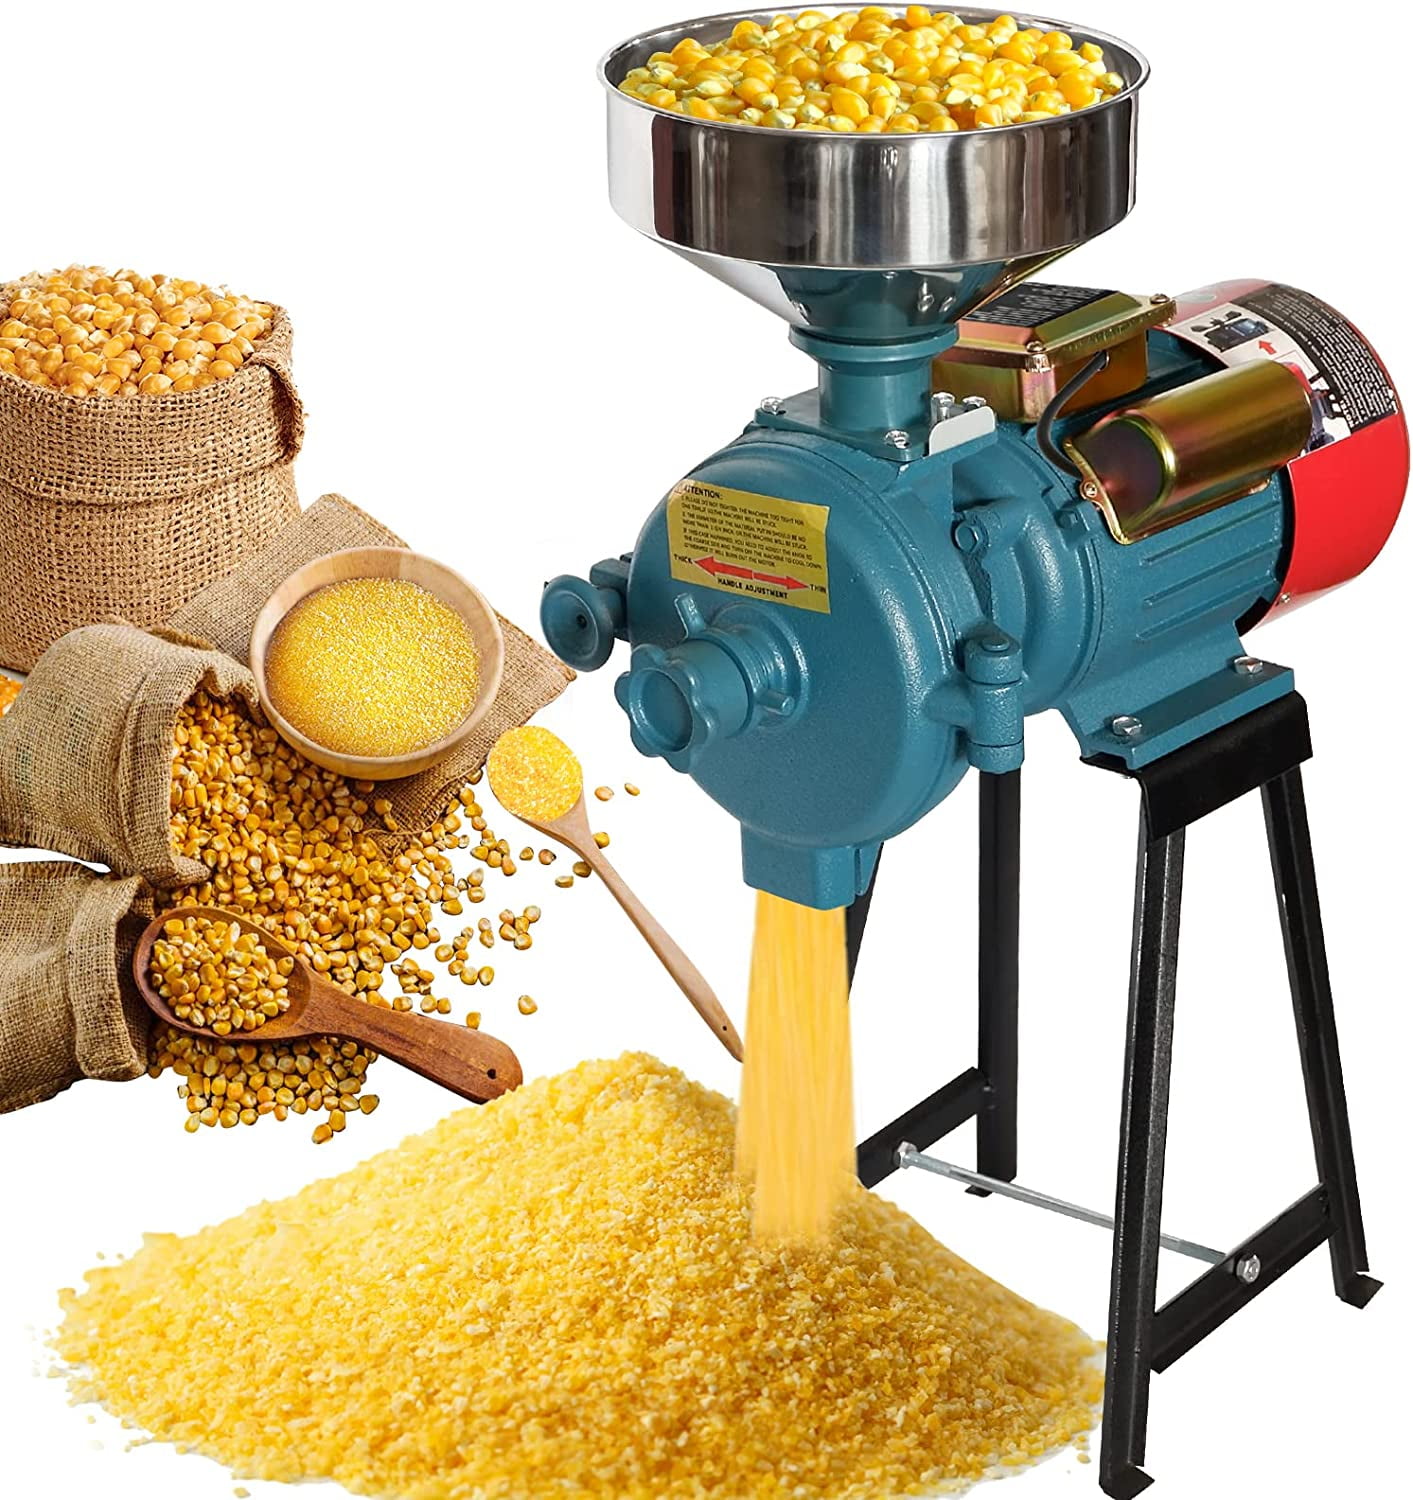 DETODDA 6.6 Gallons Corn Grinder Mill, Dry Grain Mill Grinder Electric,  Grain Grinder Mill, Electric Food Mill, Farm Home Wheat Grinder for Spice  Rice